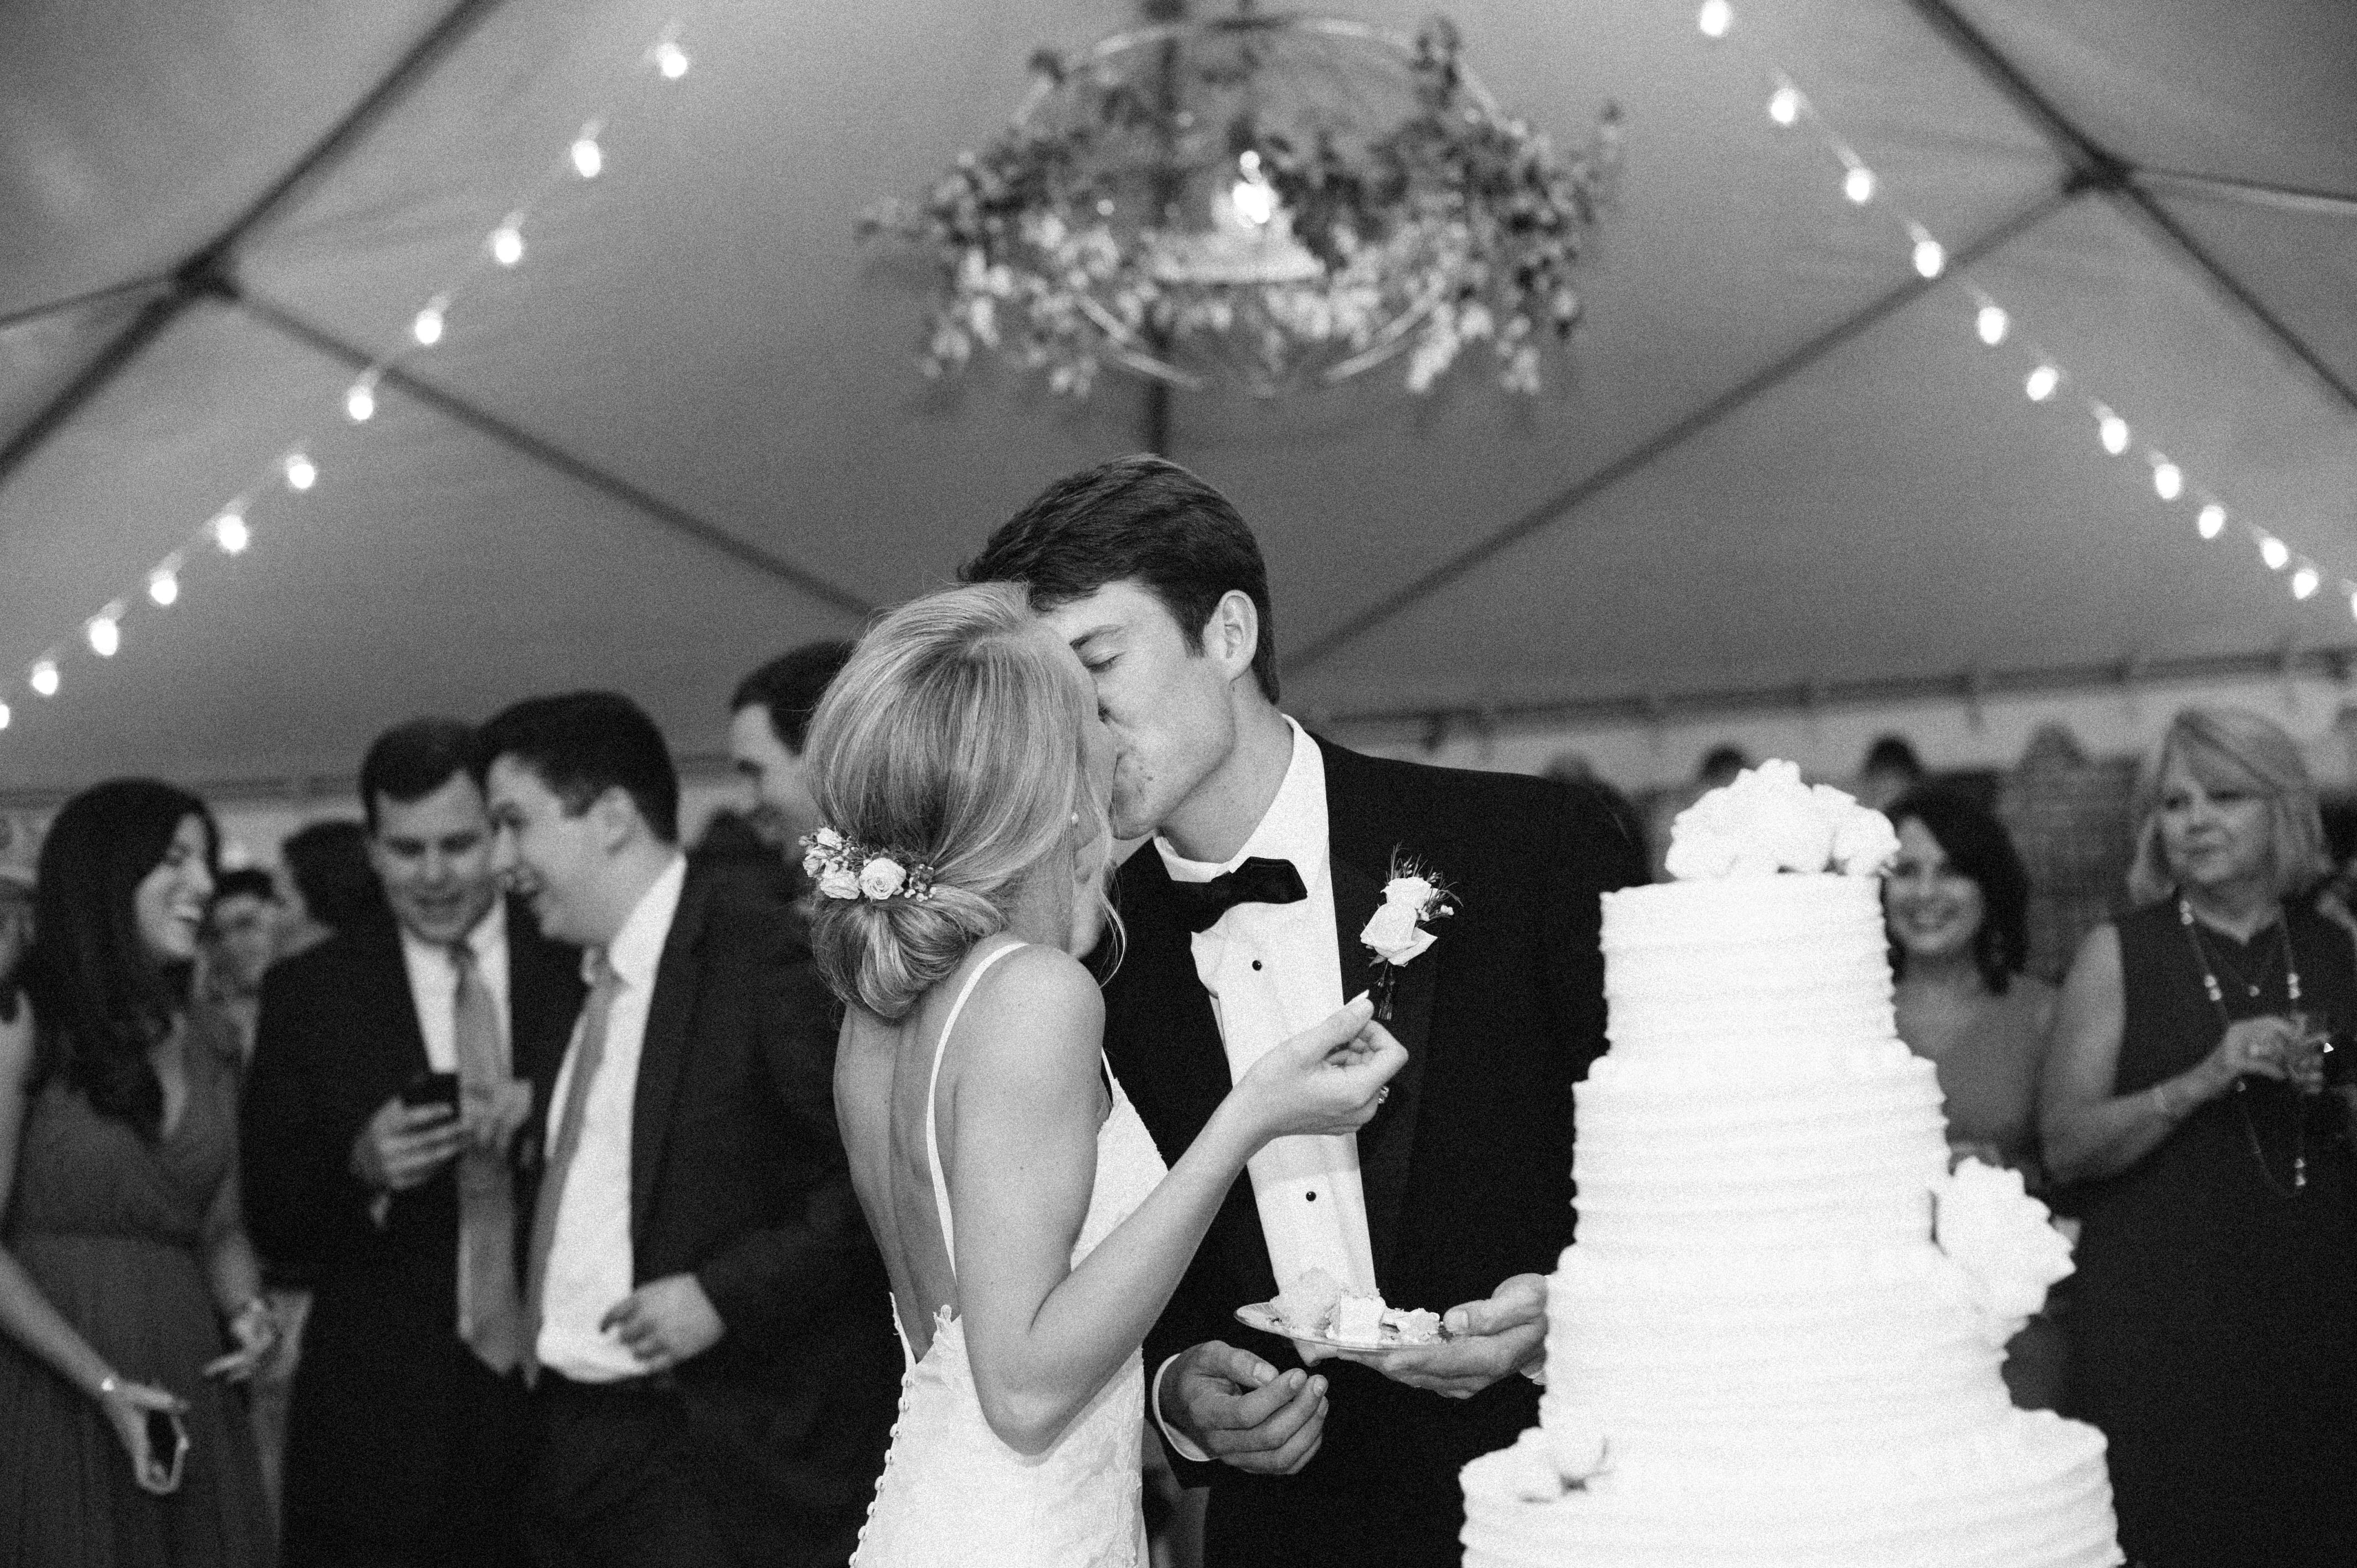 More candid bride and groom portrait of them kissing each other after wedding cake cutting in Selma, AL. ilford hp5 edit by Olivia Joy Photography